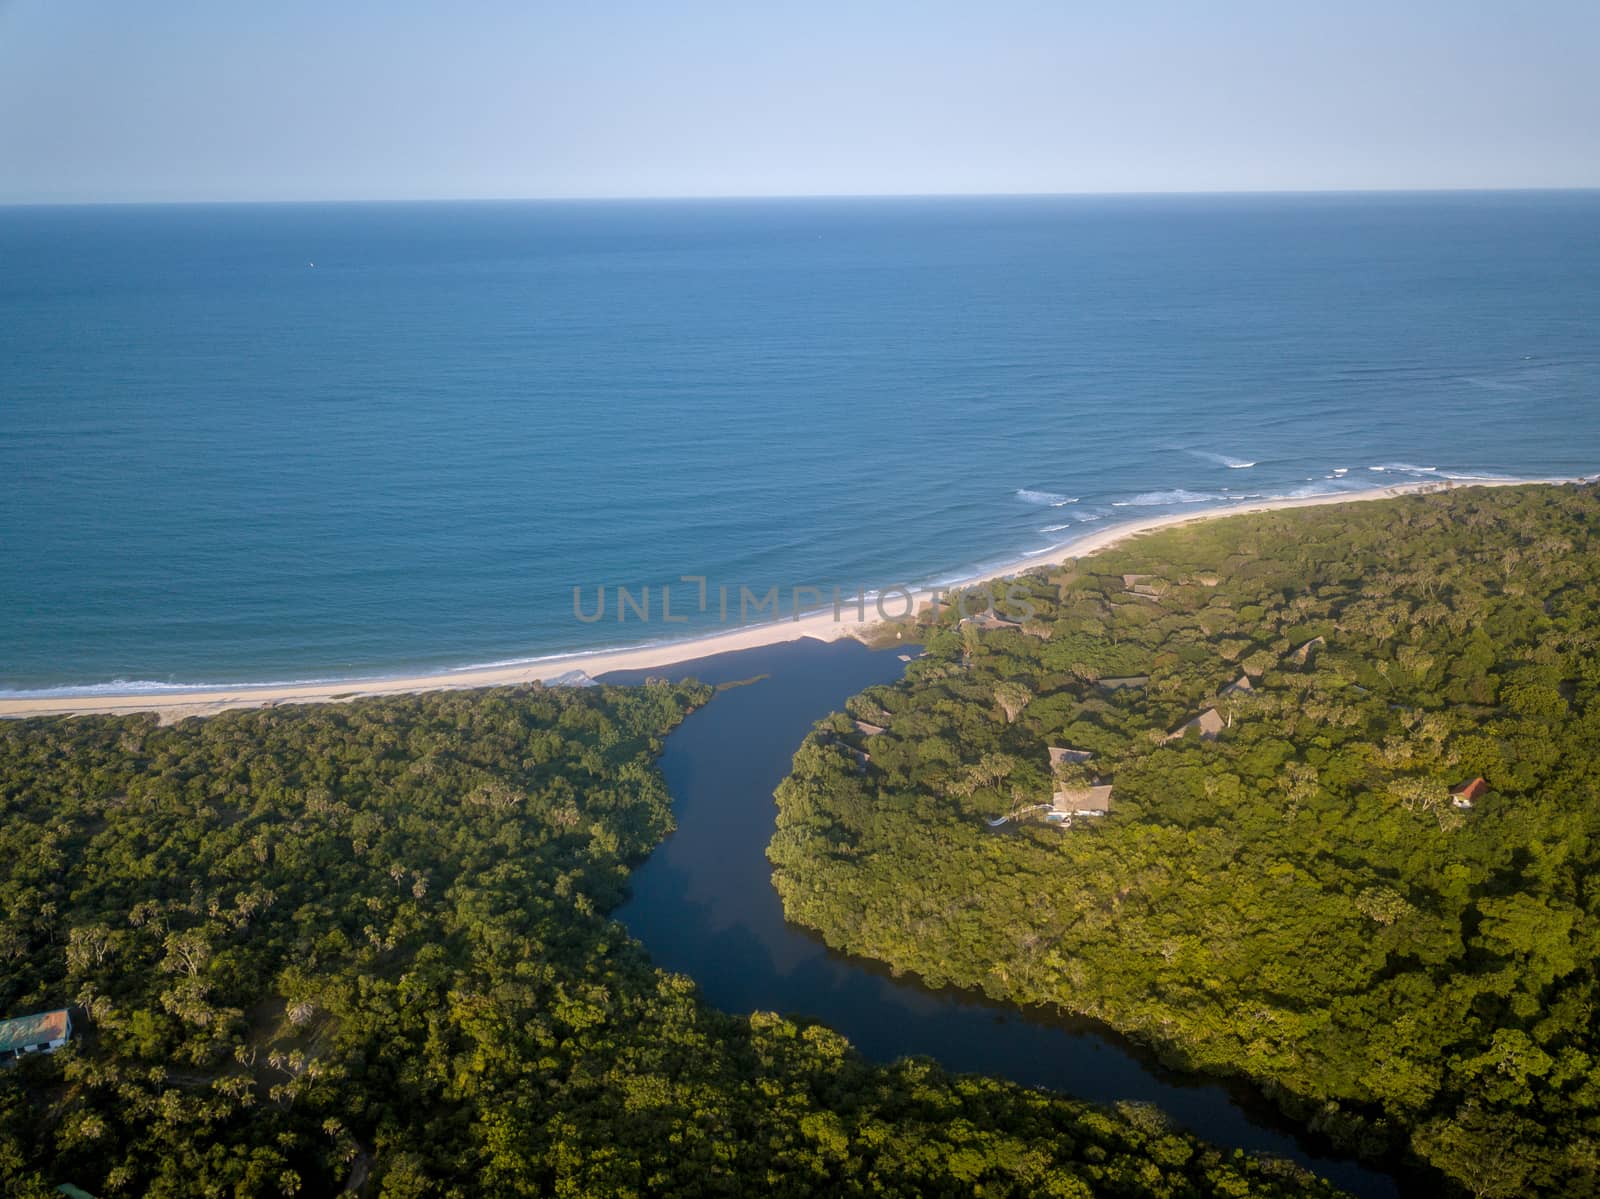 Drone picture of a lagoon in a coastal forest and the Indian ocean on the Swahili Coast, Tanzania.